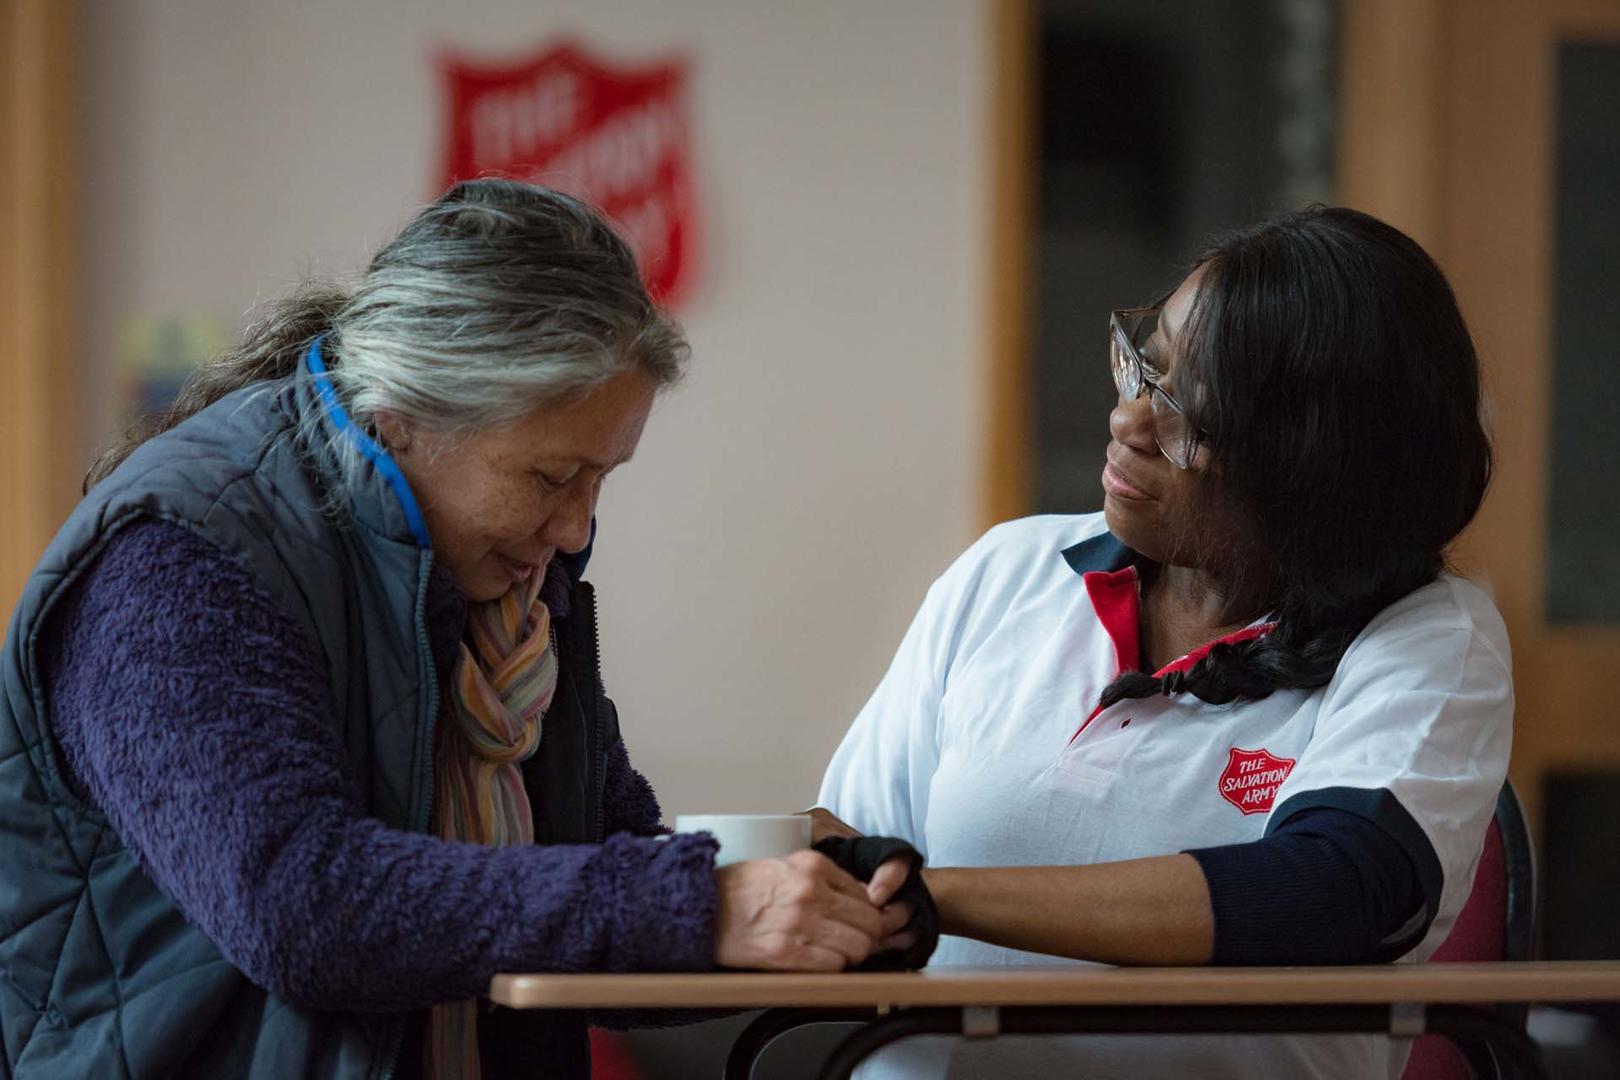 Salvation Army officer speaking with a woman in one of our centres.